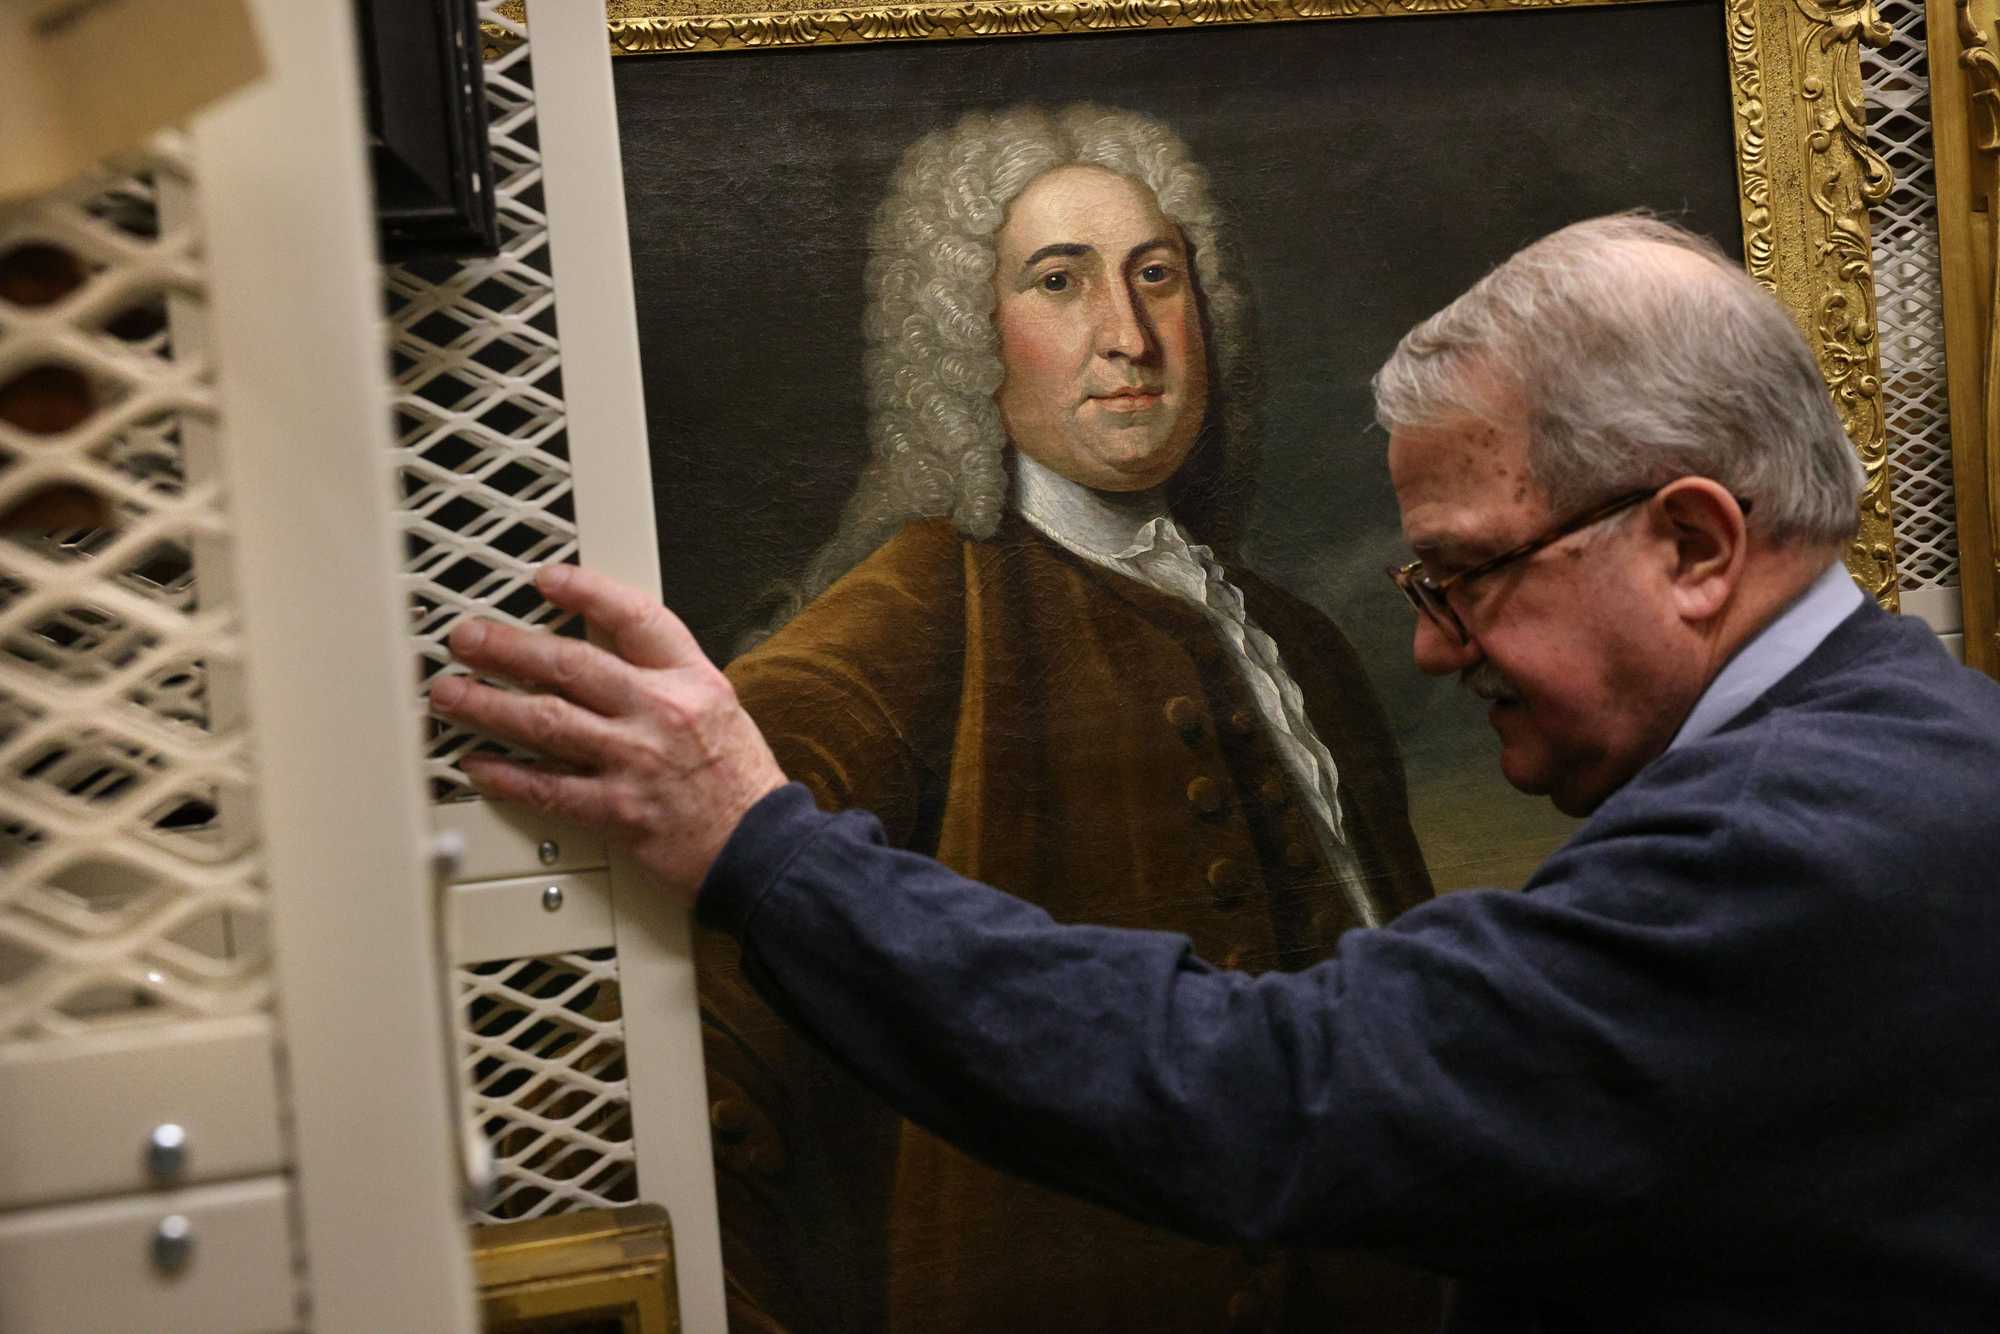 A portrait of Peter Faneuil painted by John Smibert was displayed by chief historian and librarian Peter Drummey in the stacks at the Massachusetts Historical Society in Boston.